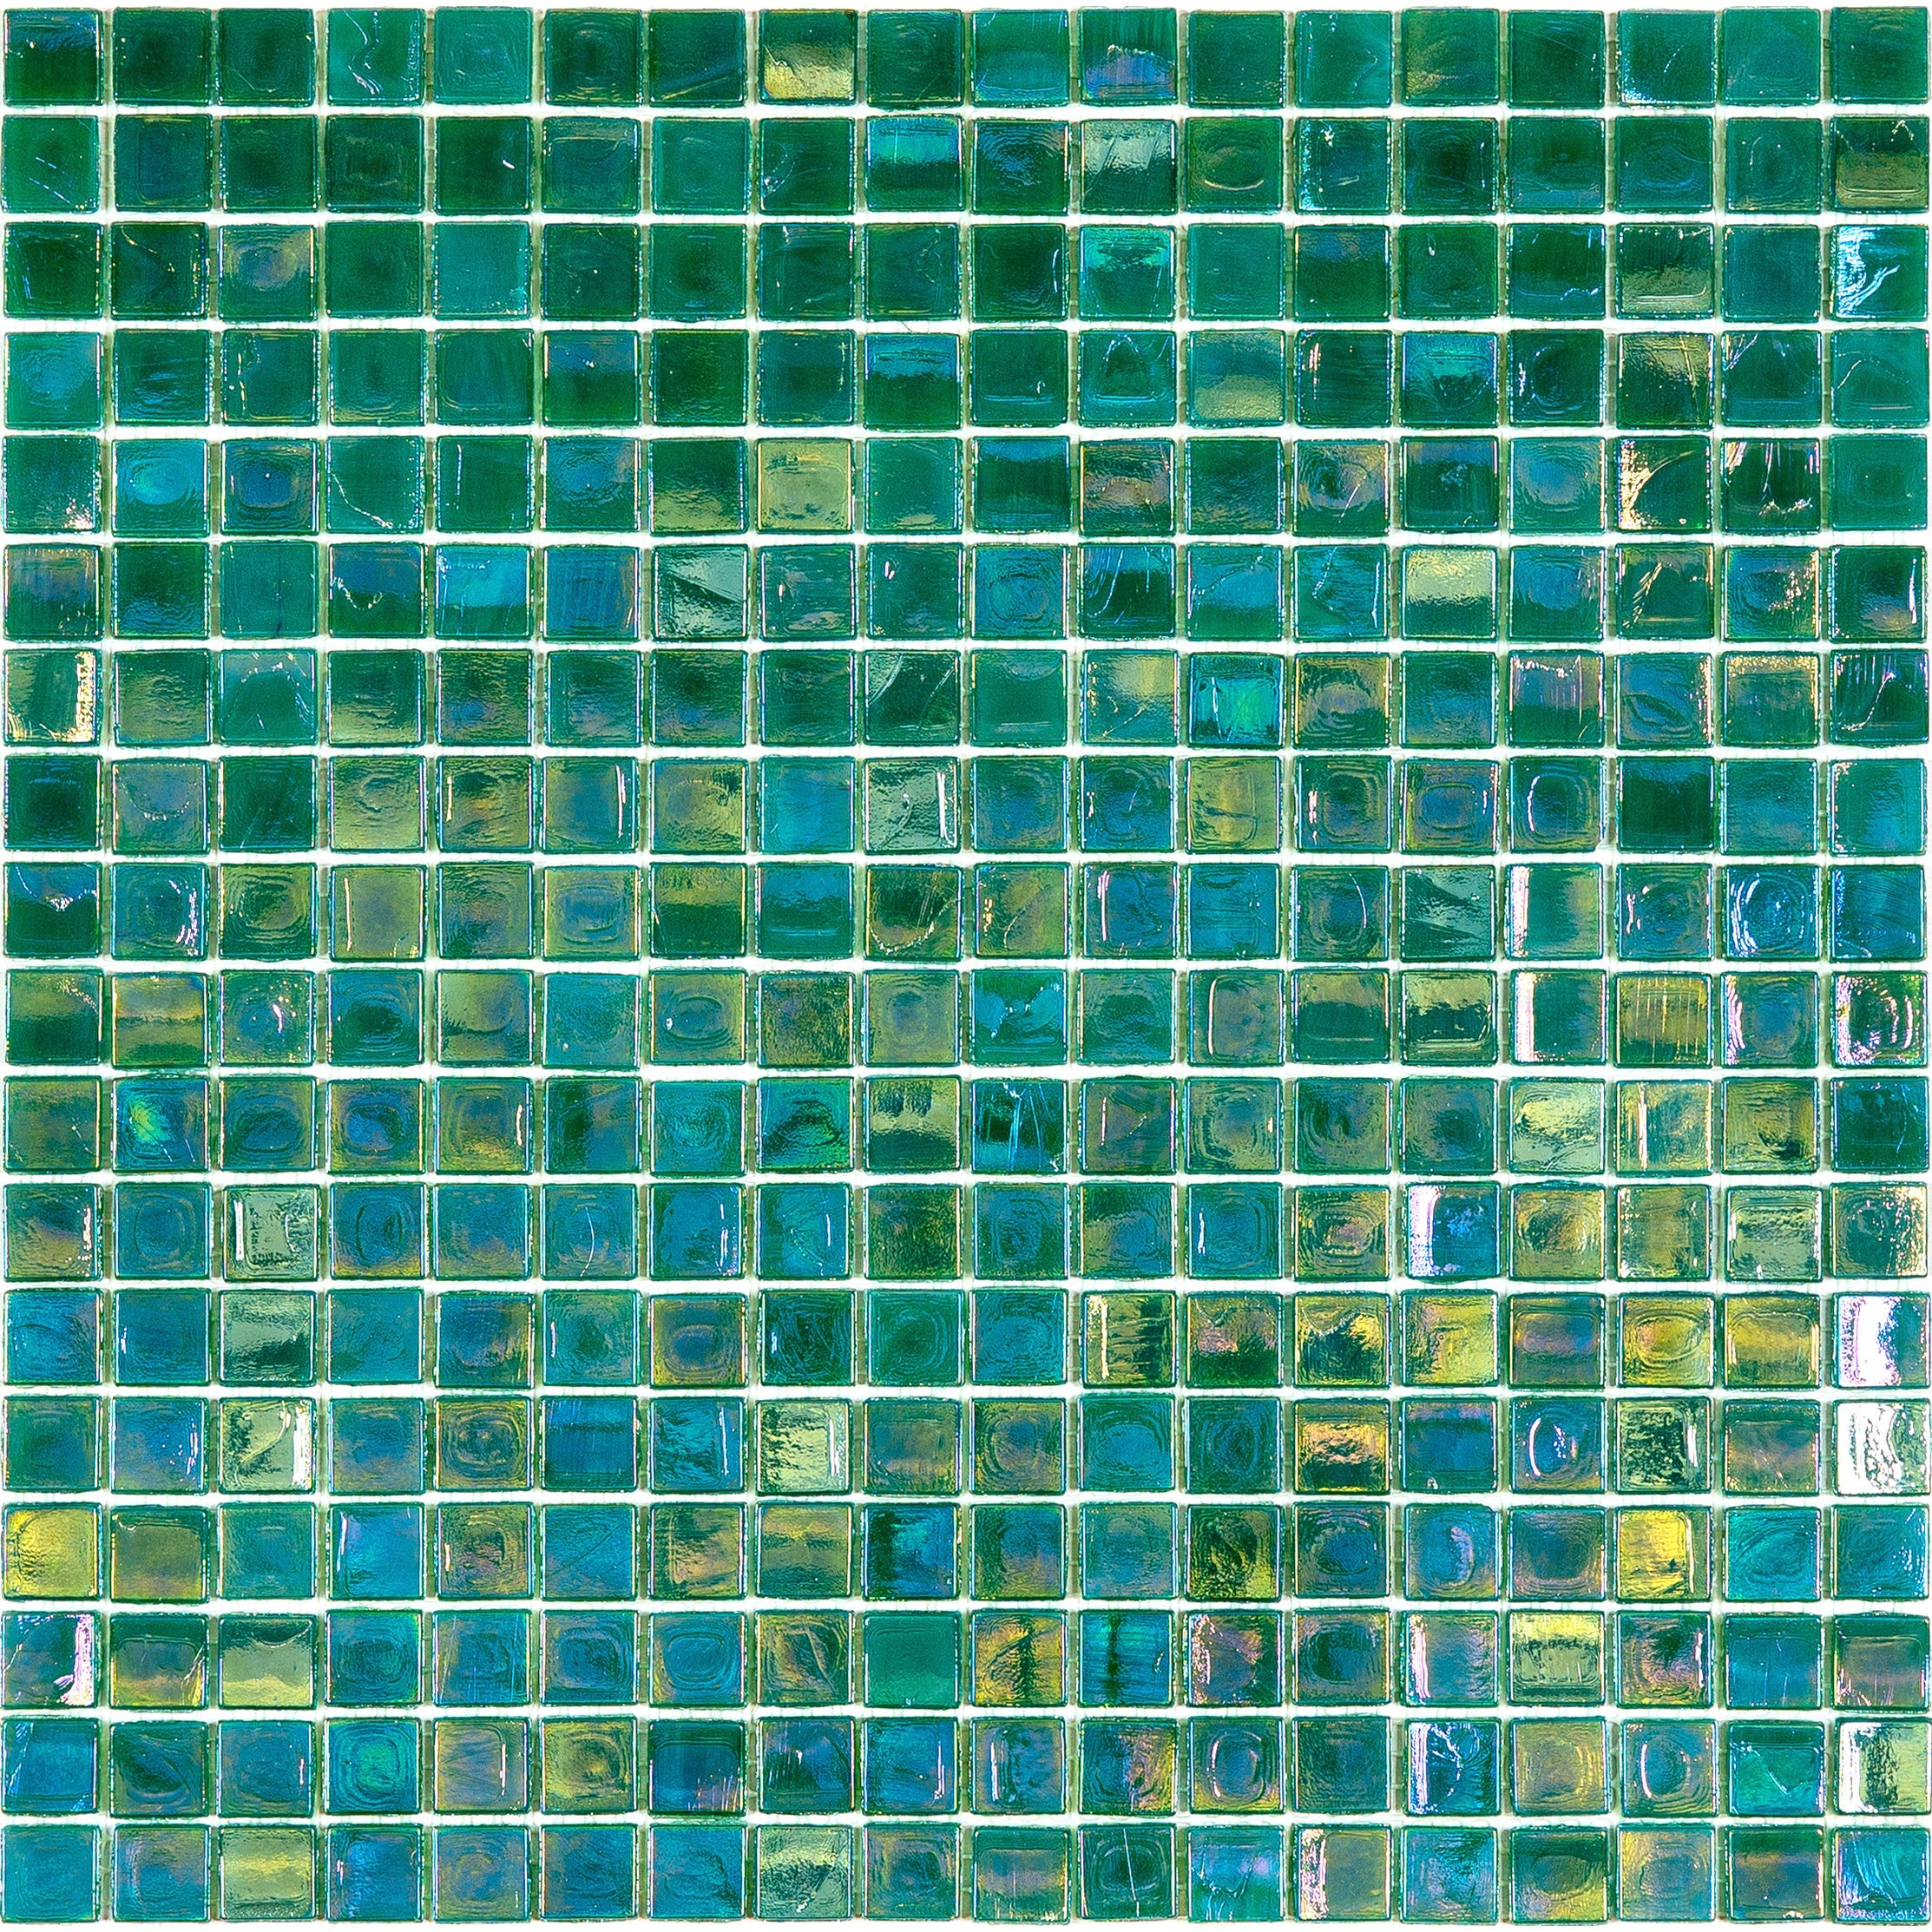 mir alma solid colors 0_6 inch nibble ne33 wall and floor mosaic distributed by surface group natural materials